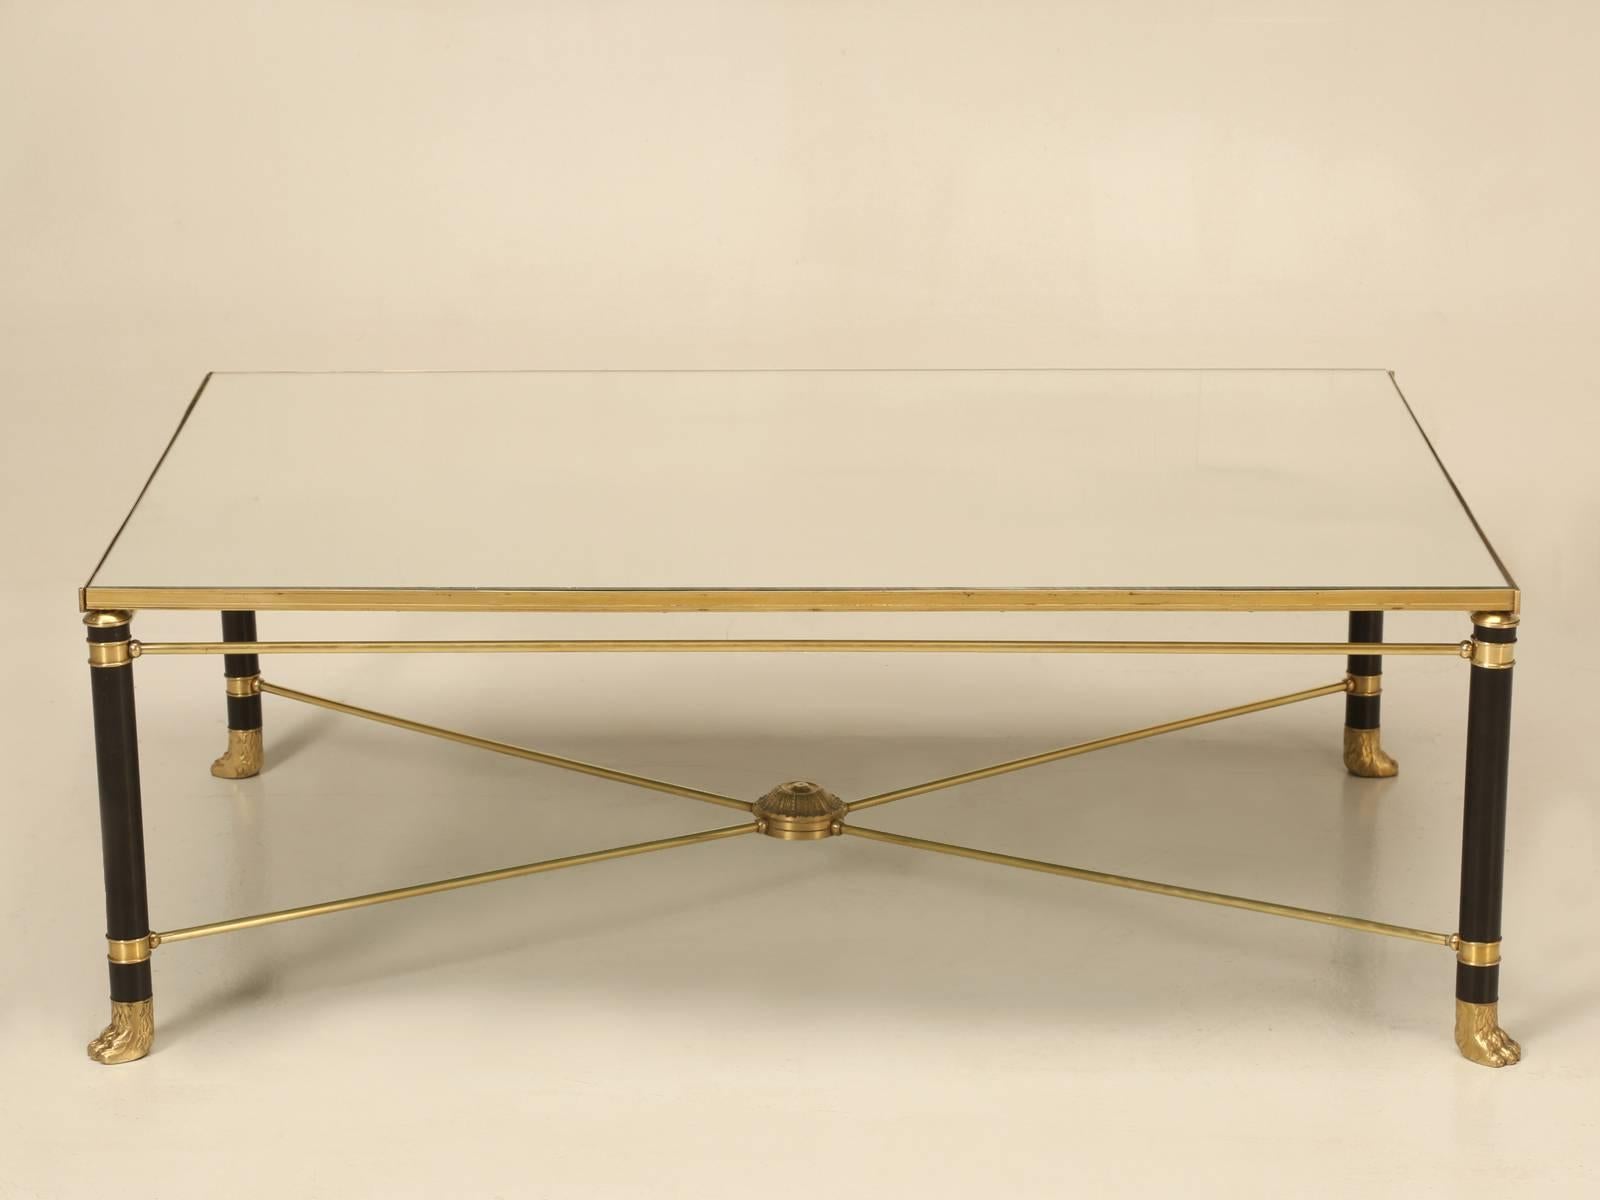 Beautifully detailed large French Mid-Century Modern coffee table, that can also be classified as neoclassical. Made from a combination of bronze, steel and brass in a very high quality manner. We also have listed on 1stdibs matching end tables and